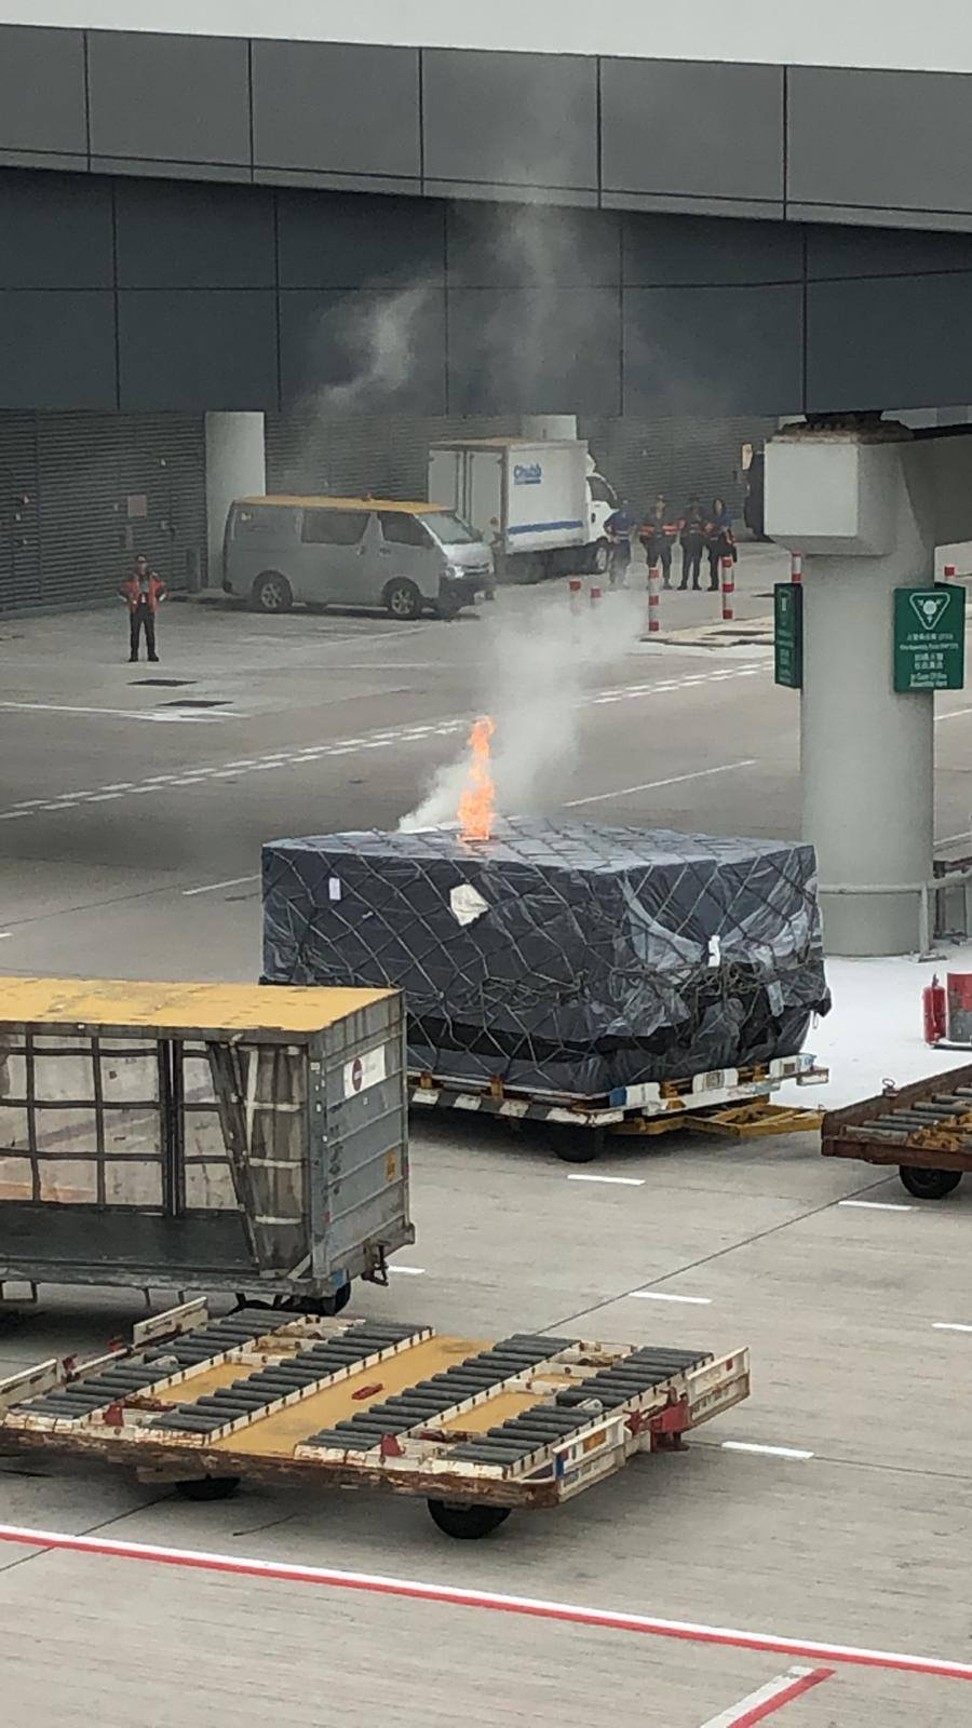 Photo from a Hong Kong Aviation Discussion Board group. Flames on a cargo pallet as it awaited loading onto a Hong Kong Airlines plane bound for Taipei. Source: Facebook